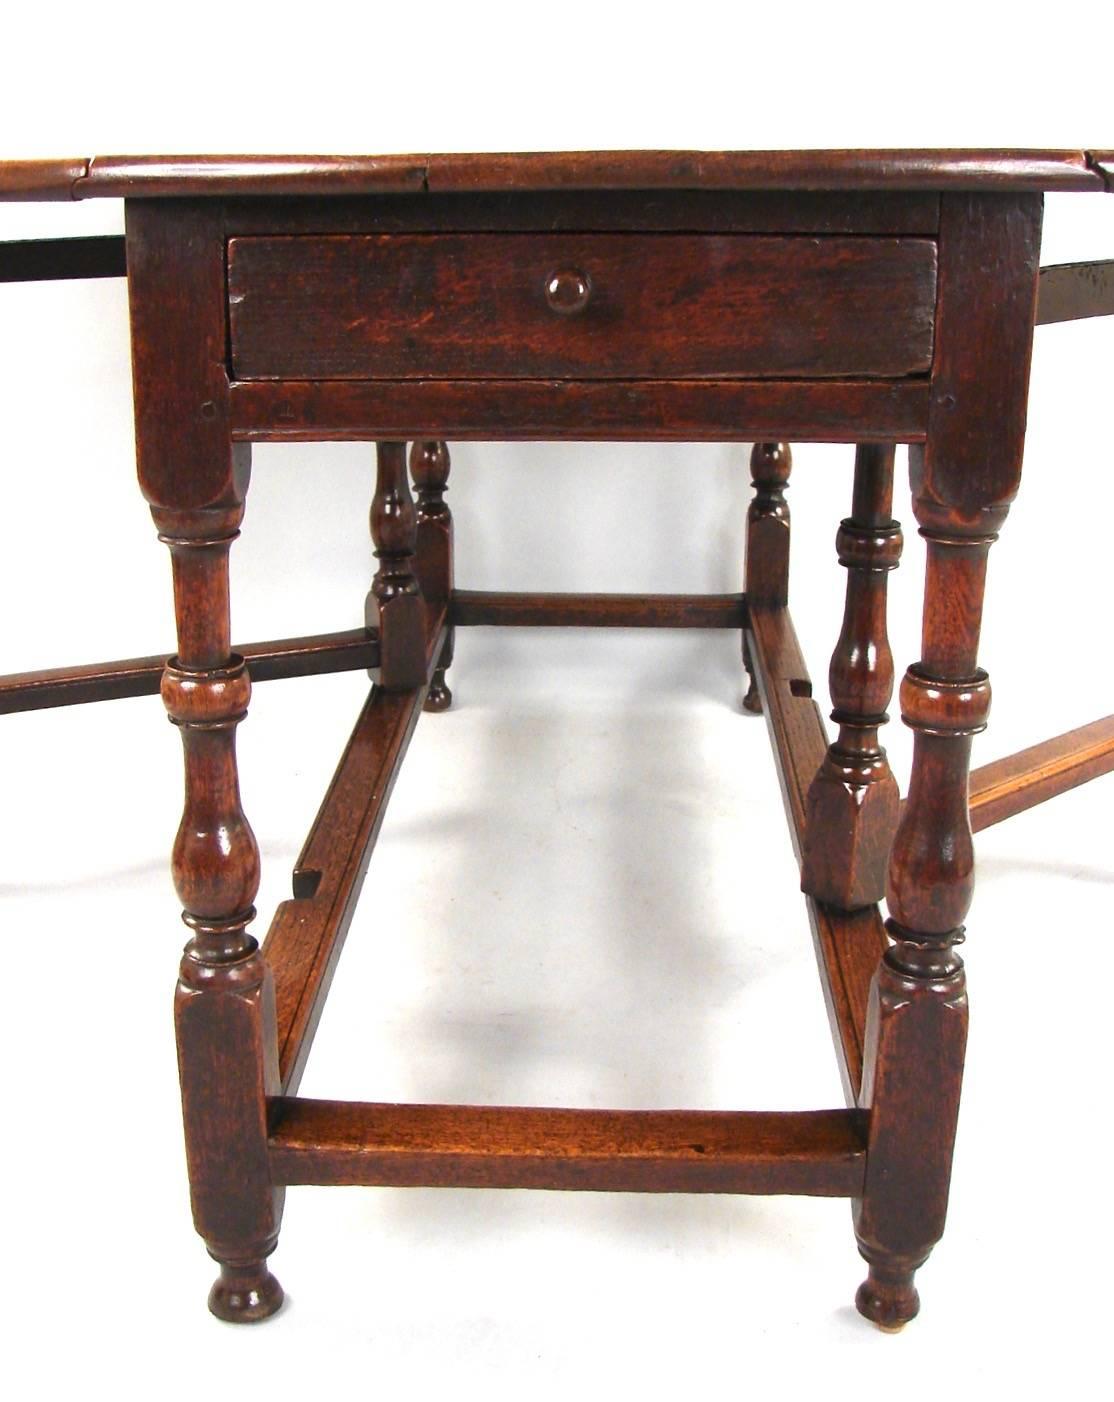 A substantial English oak drop-leaf table, the patinated light oak top above a single drawer supported on well-turned legs ending in shaped feet, circa 1690-1700.